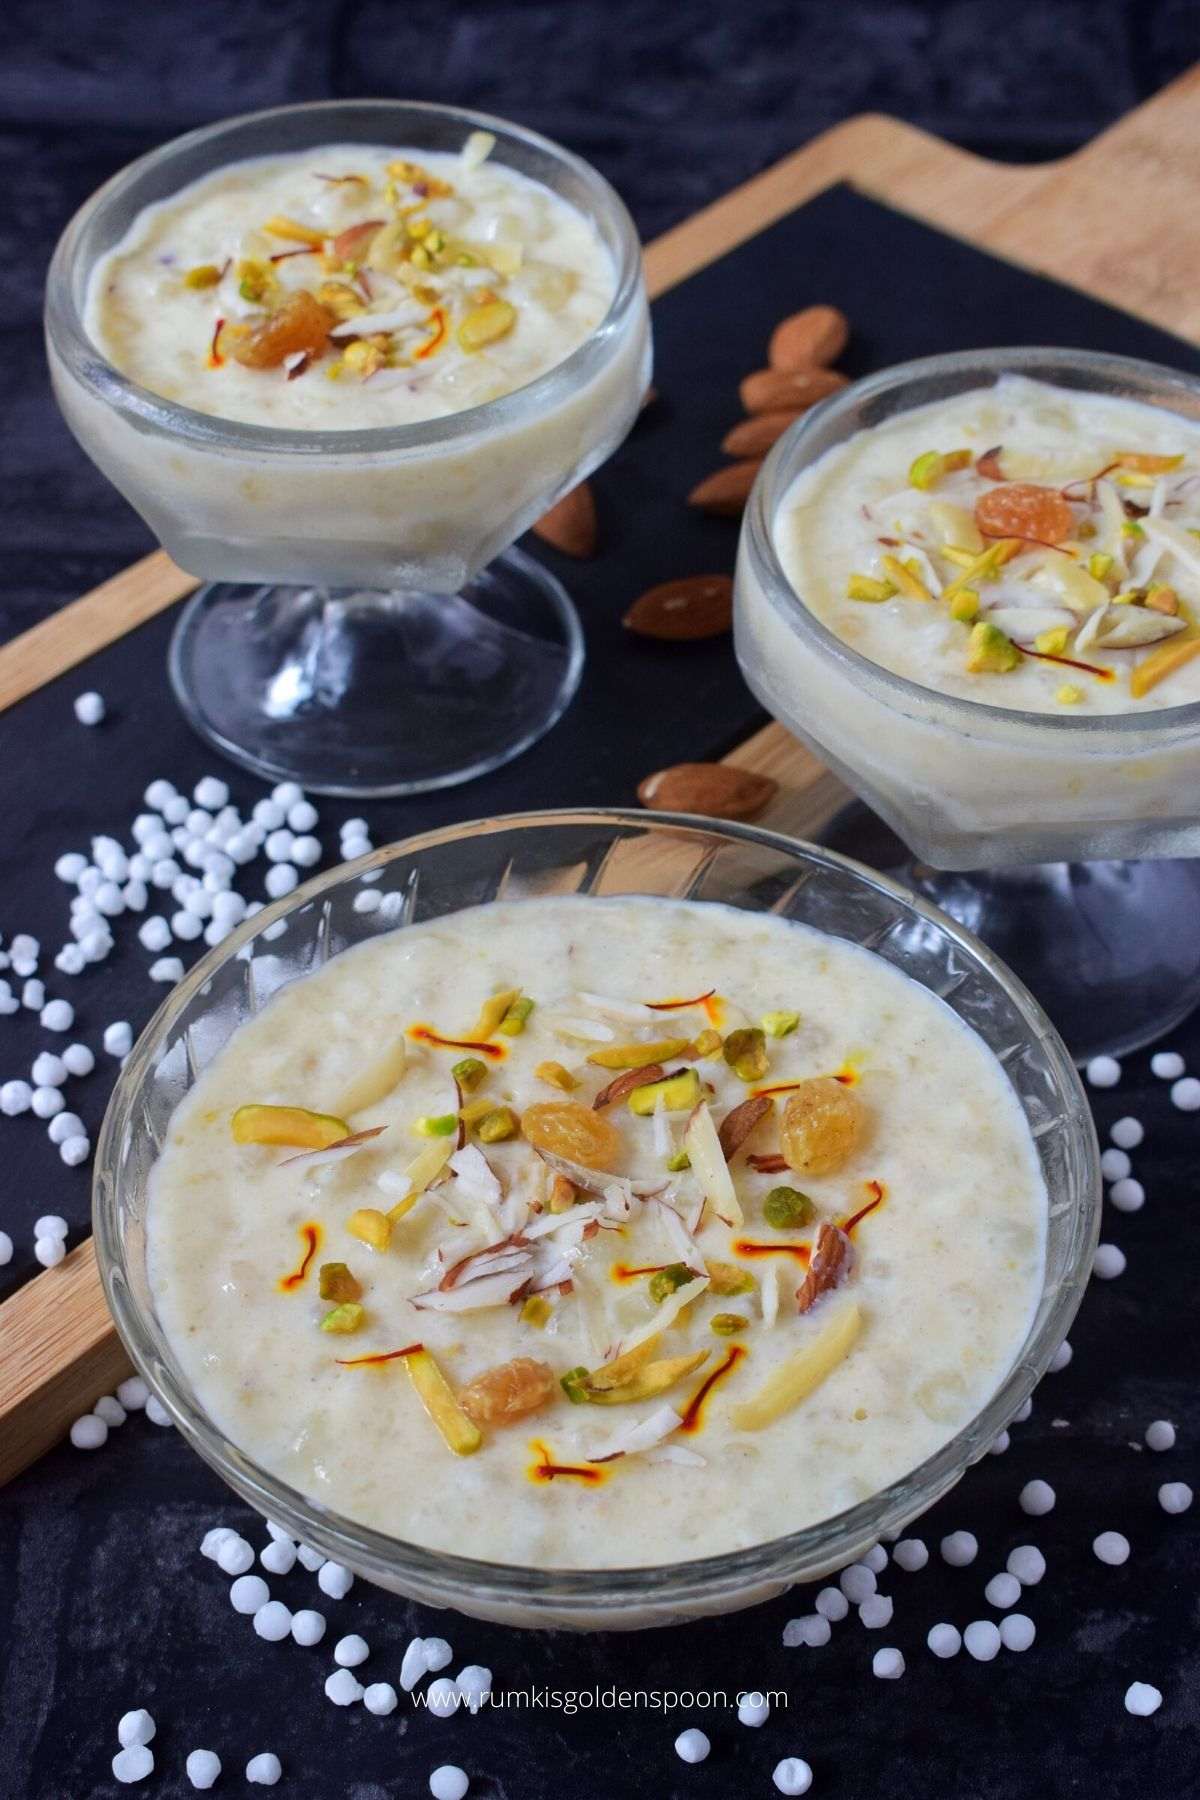 sabudana kheer, sabudane ki kheer, sabudana ki kheer, sabudana kheer recipe, how to make sabudana kheer, sabudane ki kheer kaise banti hai, sabudana kheer recipe in hindi, sago payasam, sabudana kheer benefits, sabudana ki kheer banane ki vidhi, sabudana kheer with jaggery, sabudana ki kheer kaise banta hai, sabudane ki kheer ke fayde, is sabudana healthy for weight loss, sabudana kheer for babies, sabudana kheer in hindi, sabudane ki kheer kaise banai jati hai, sabudana ki kheer ki recipe, sabudane ki kheer banane ki recipe, sago payasam recipe, can we eat sabudana in fast, sabudana kheer recipe in marathi, sabudane ki kheer recipe, sabudana kheer without milk, how to prepare sabudana kheer, sabudana kheer recipe for babies, sabudana kheer ke fayde, sabudana kheer banane ki vidhi, is sabudana is good for weight loss, sabudana kheer for weight gain, sabudana ki kheer recipe, sabudana kheer kaise banta hai, how to make sago payasam, sago payasam with jaggery, how to make payasam with sago, sabudana recipe for breakfast, vrat ka khana, navratri recipes, recipes of navratri food, navratri vrat recipes, navratri special recipes, Rumki's Golden Spoon